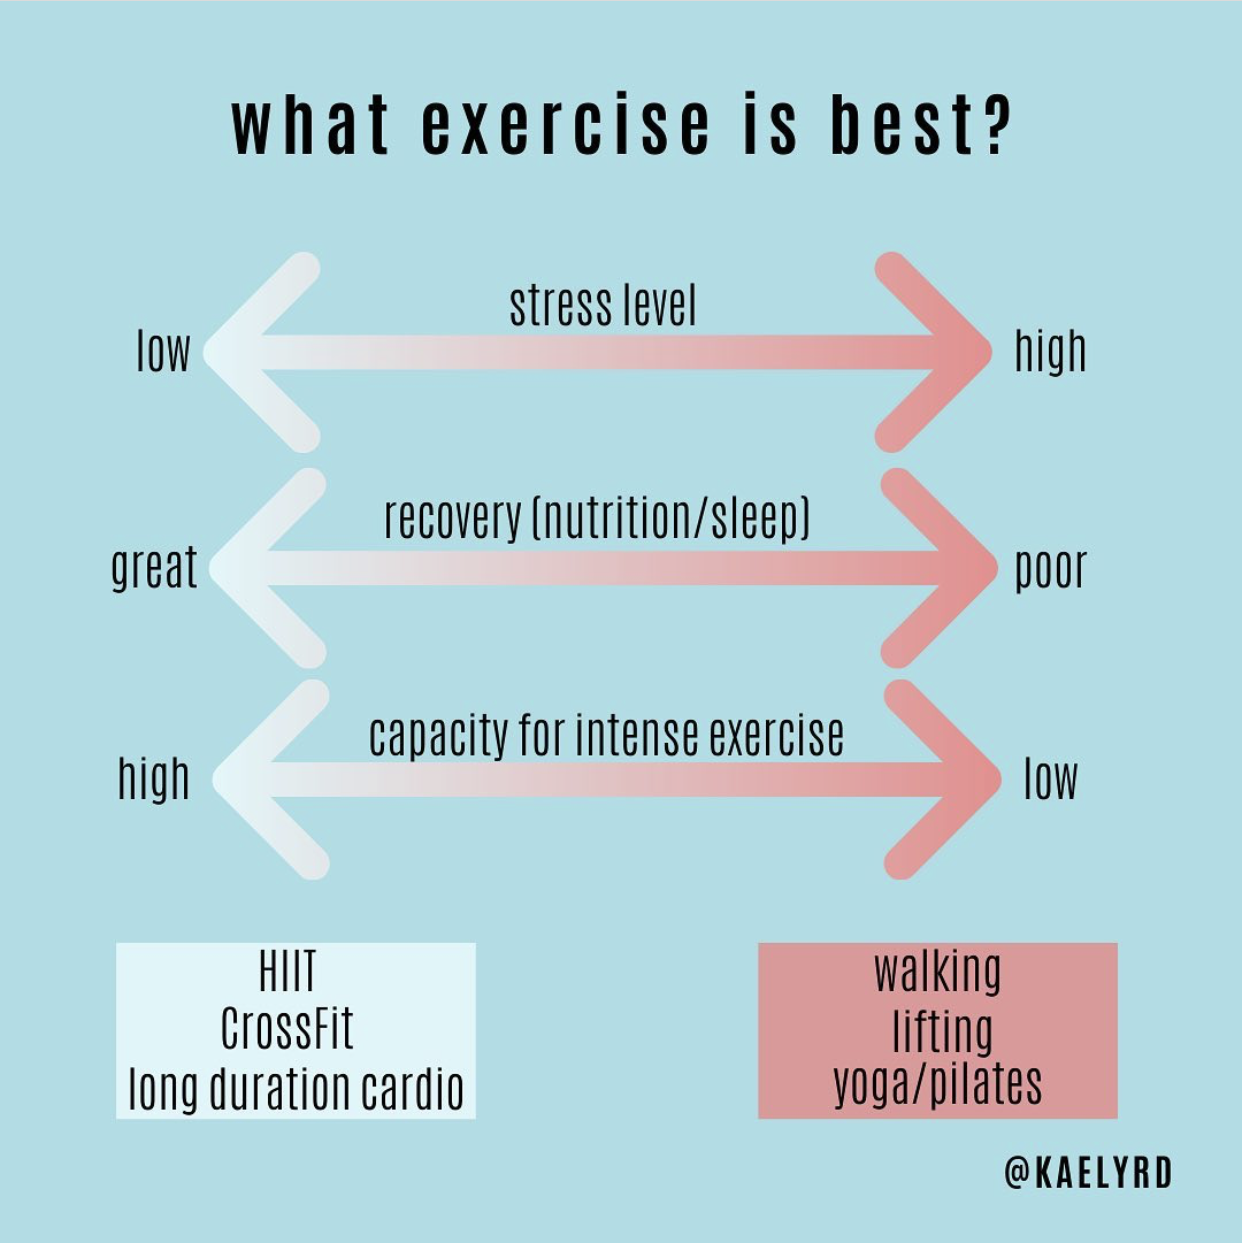 What excercise is best? Walking, Lifting, Yoga can be better than HIIT, CrossFit, or long duration cardio for stress, nutrition/sleep.